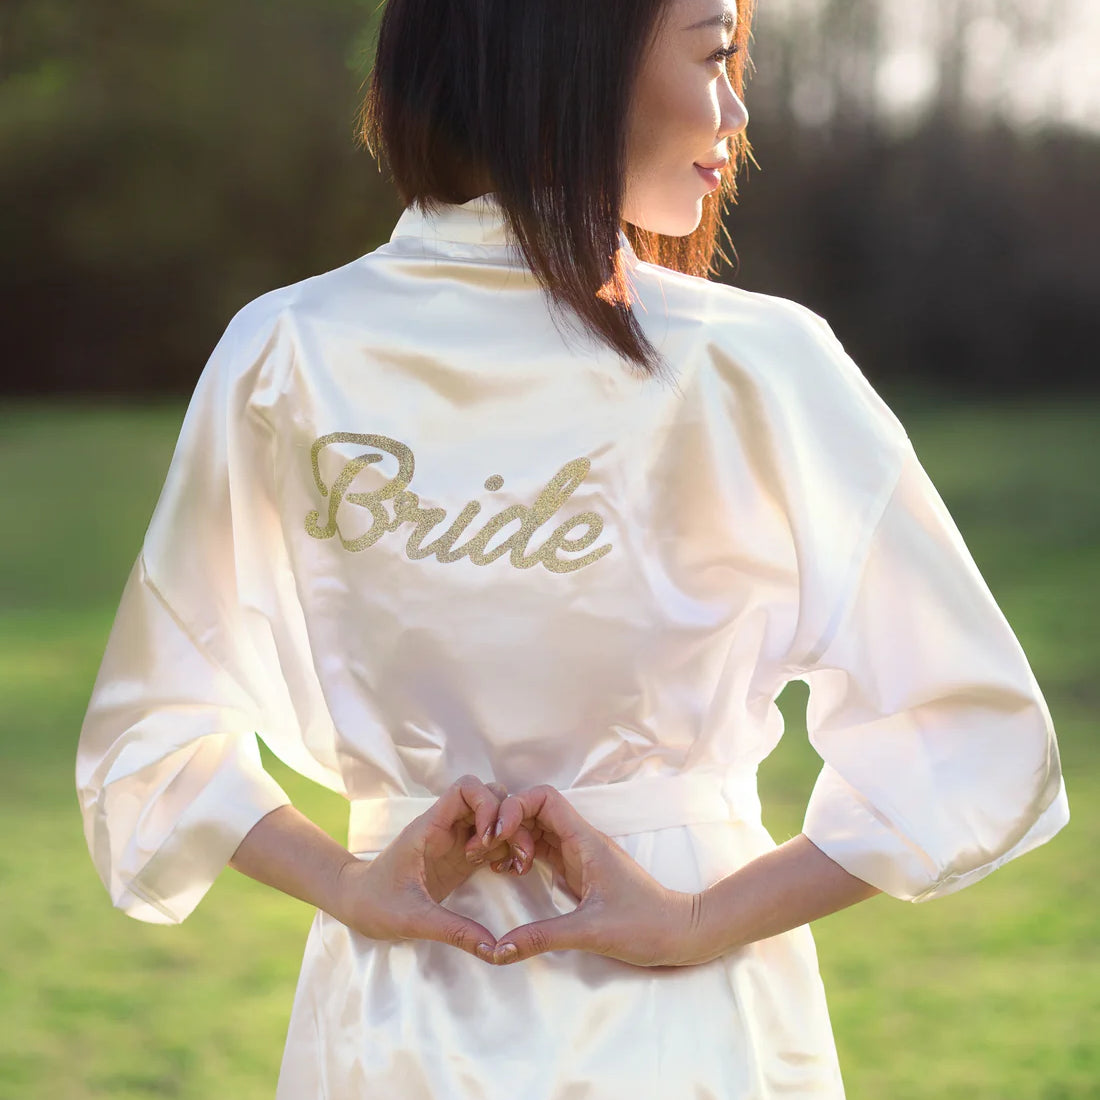 Woman wearing white robe with gold bride lettering on it looking to the side making a heart with her hands on her back, Shop T.K.S